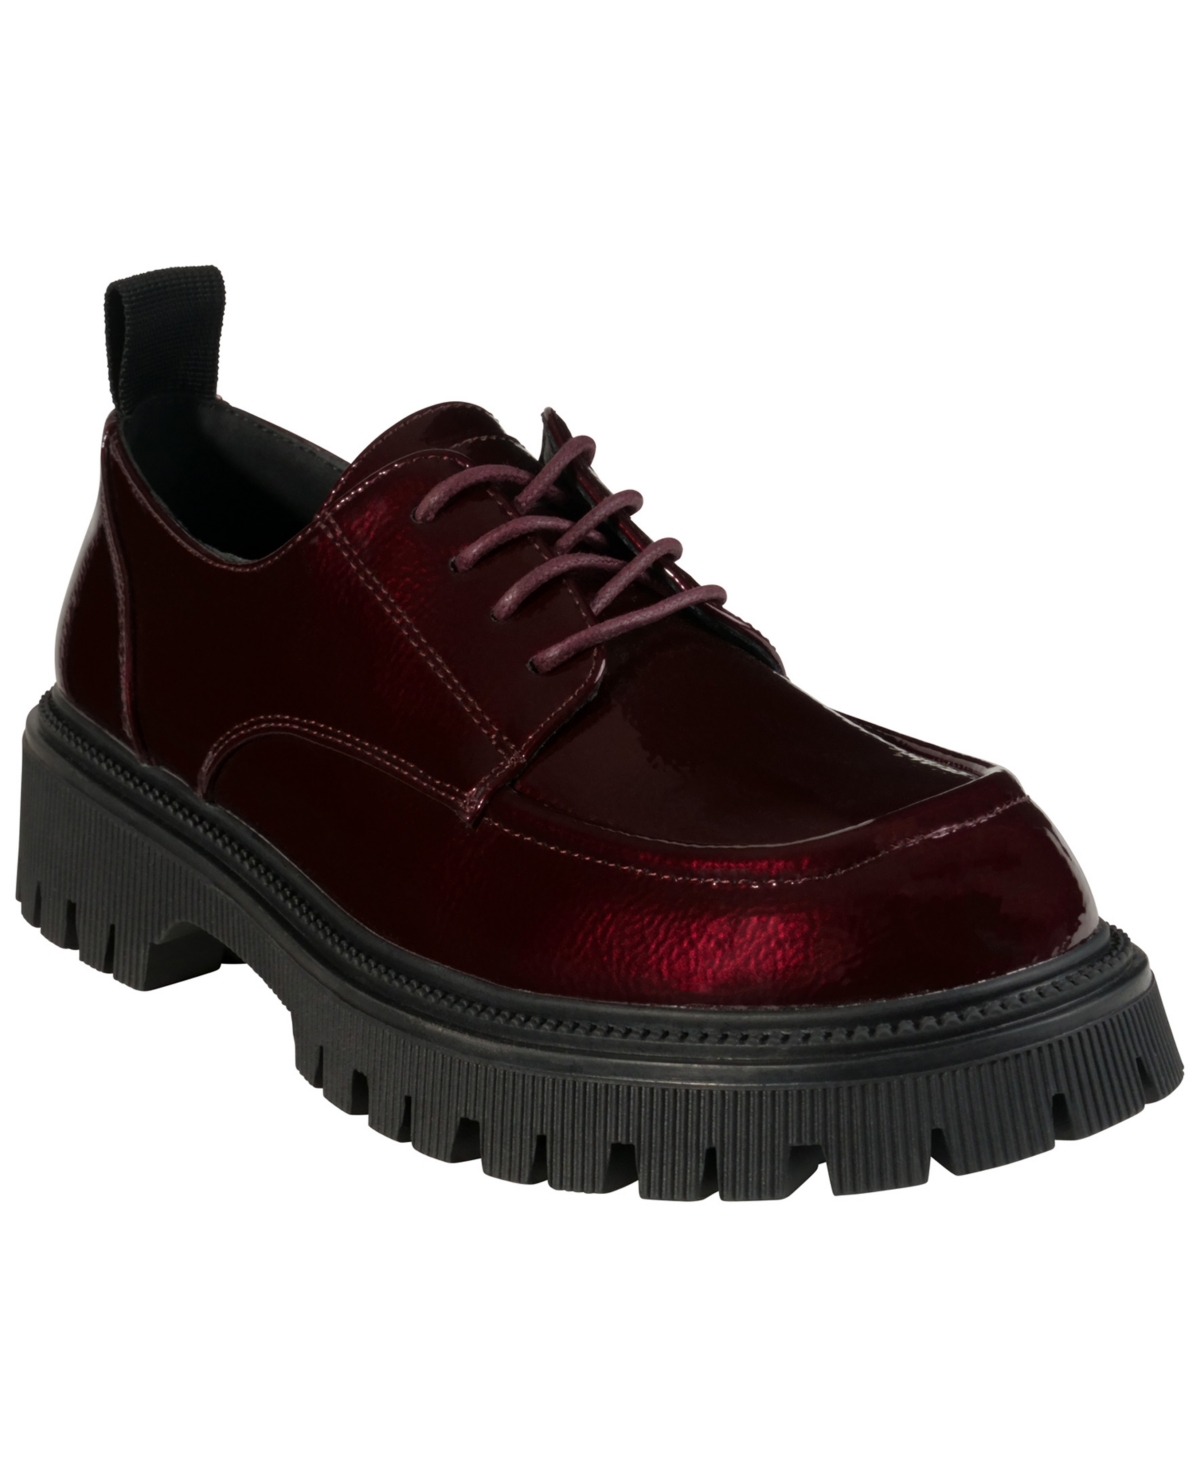 Gc Shoes Women's Drew Lace Up Lug Sole Oxford Loafers In Burgundy